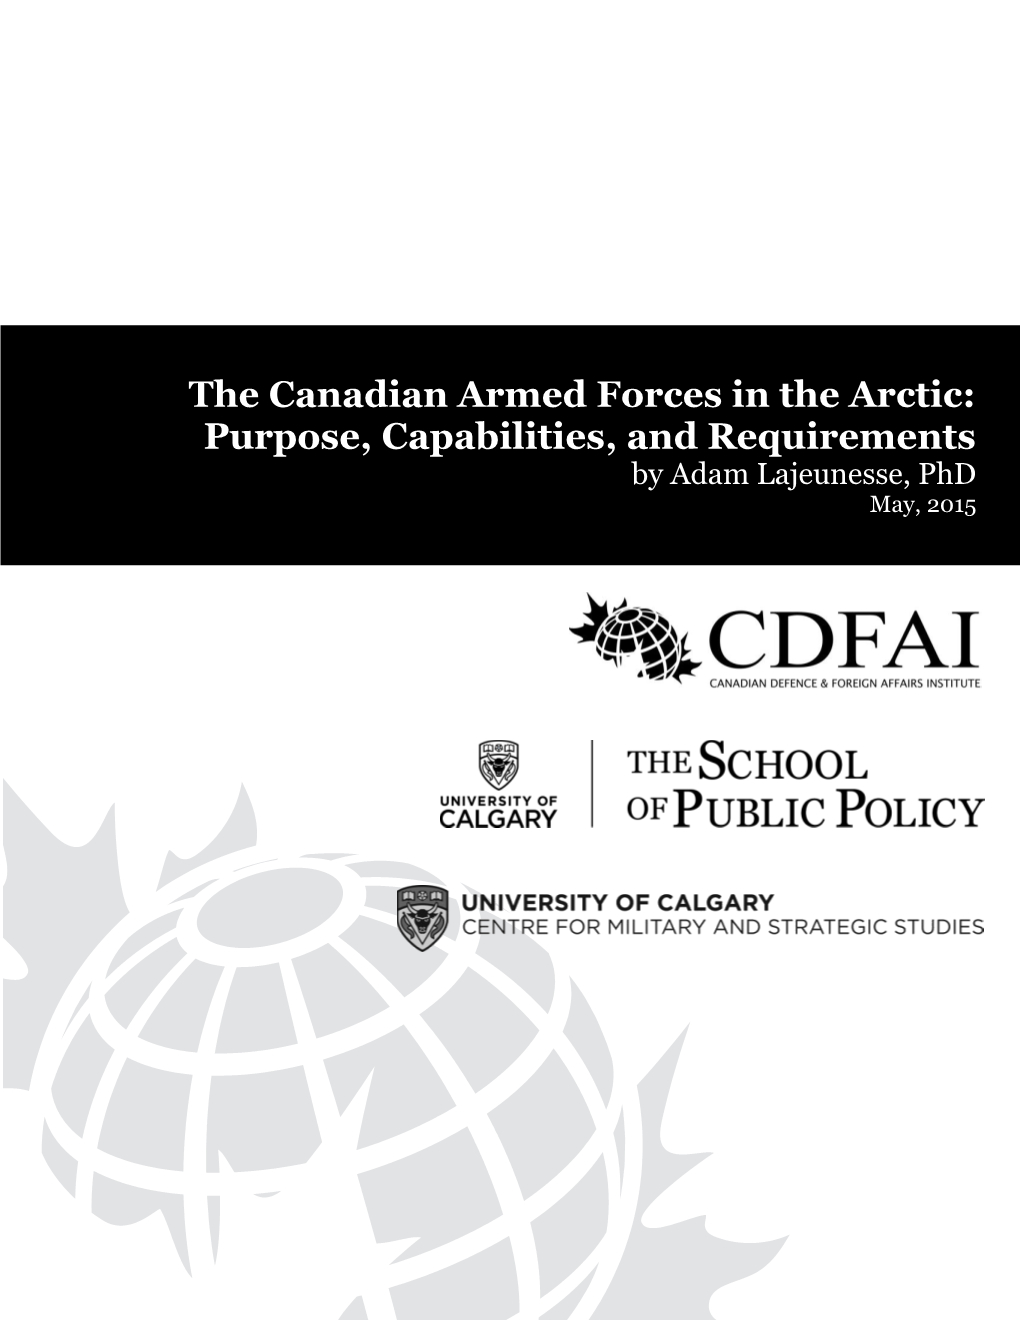 The Canadian Armed Forces in the Arctic: Purpose, Capabilities, and Requirements